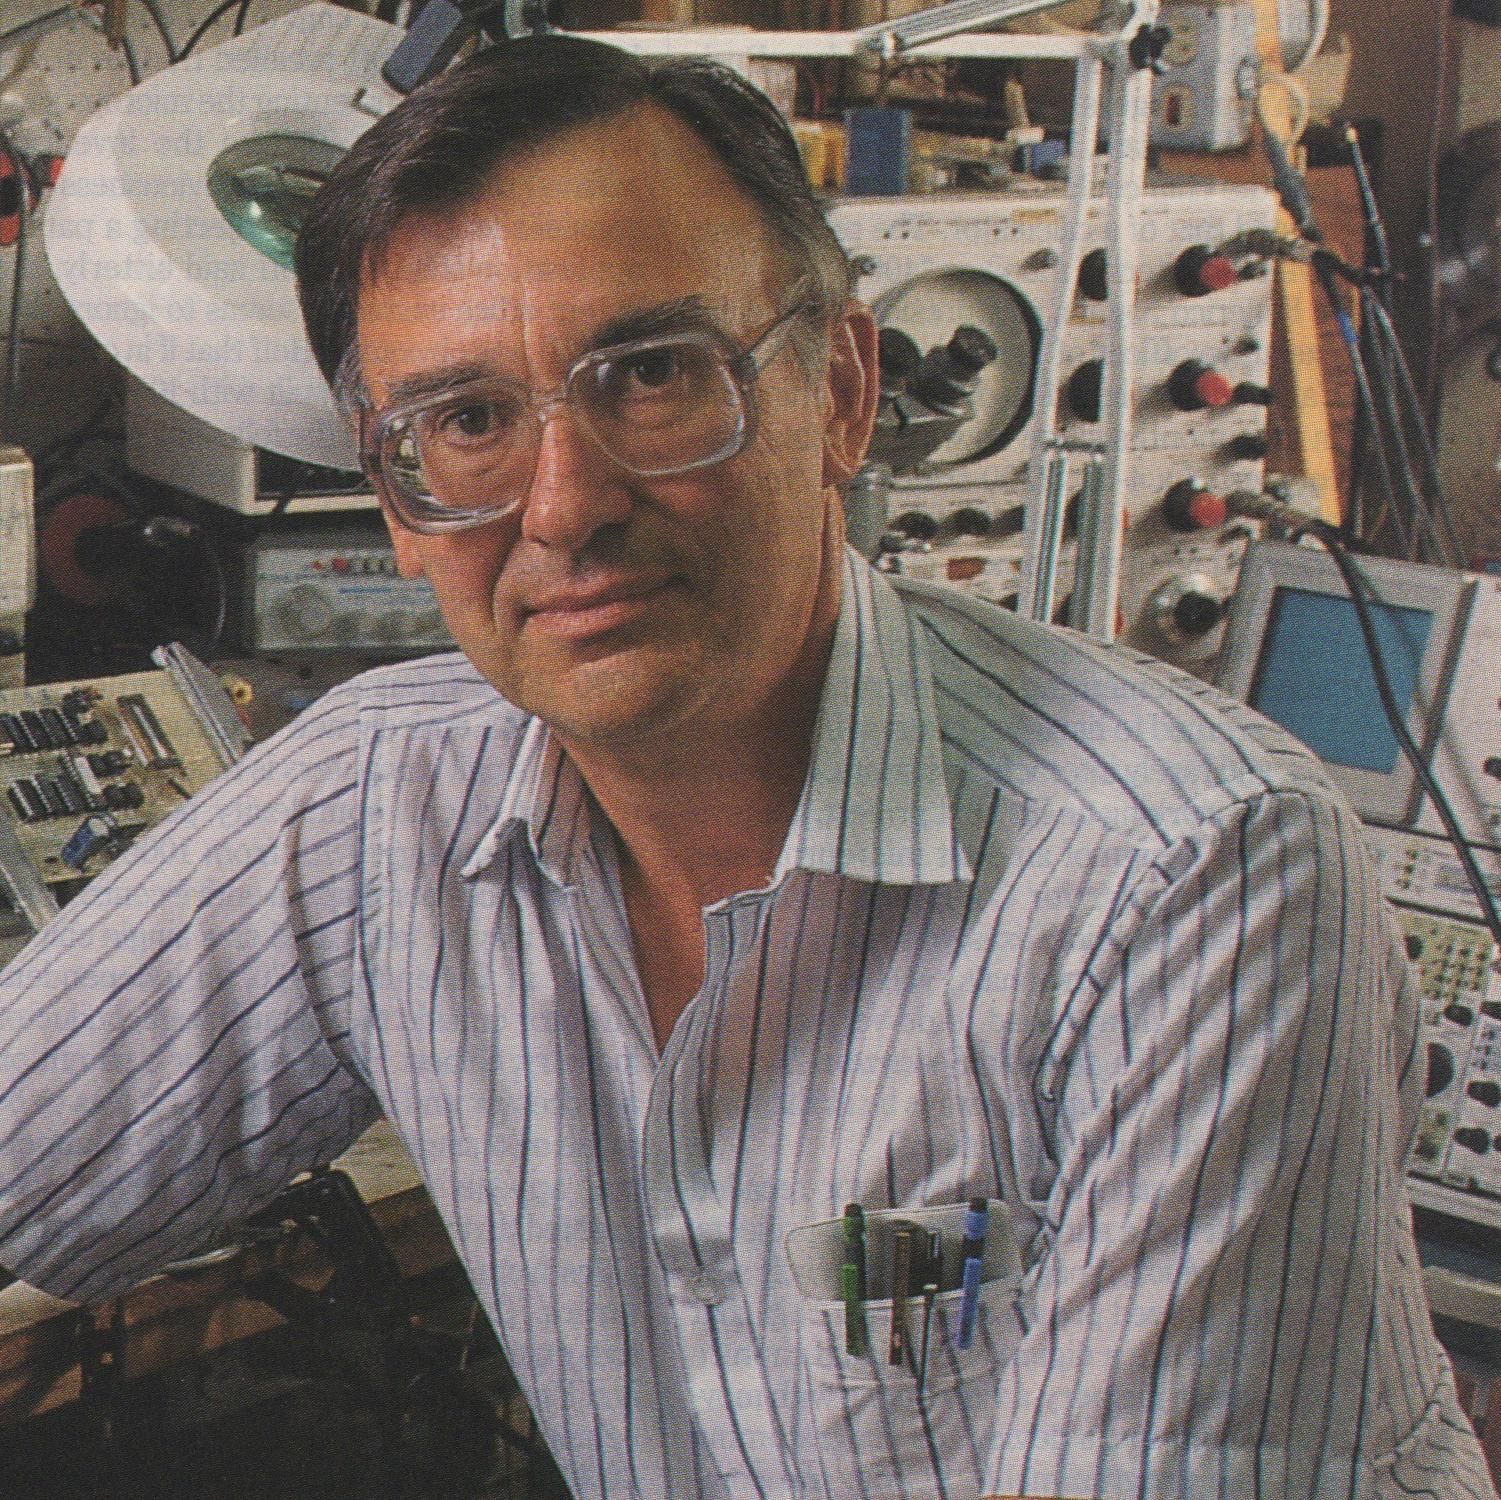 Man in white striped shirt with pocket protector seated in front of oscilloscope and other electronics equipment